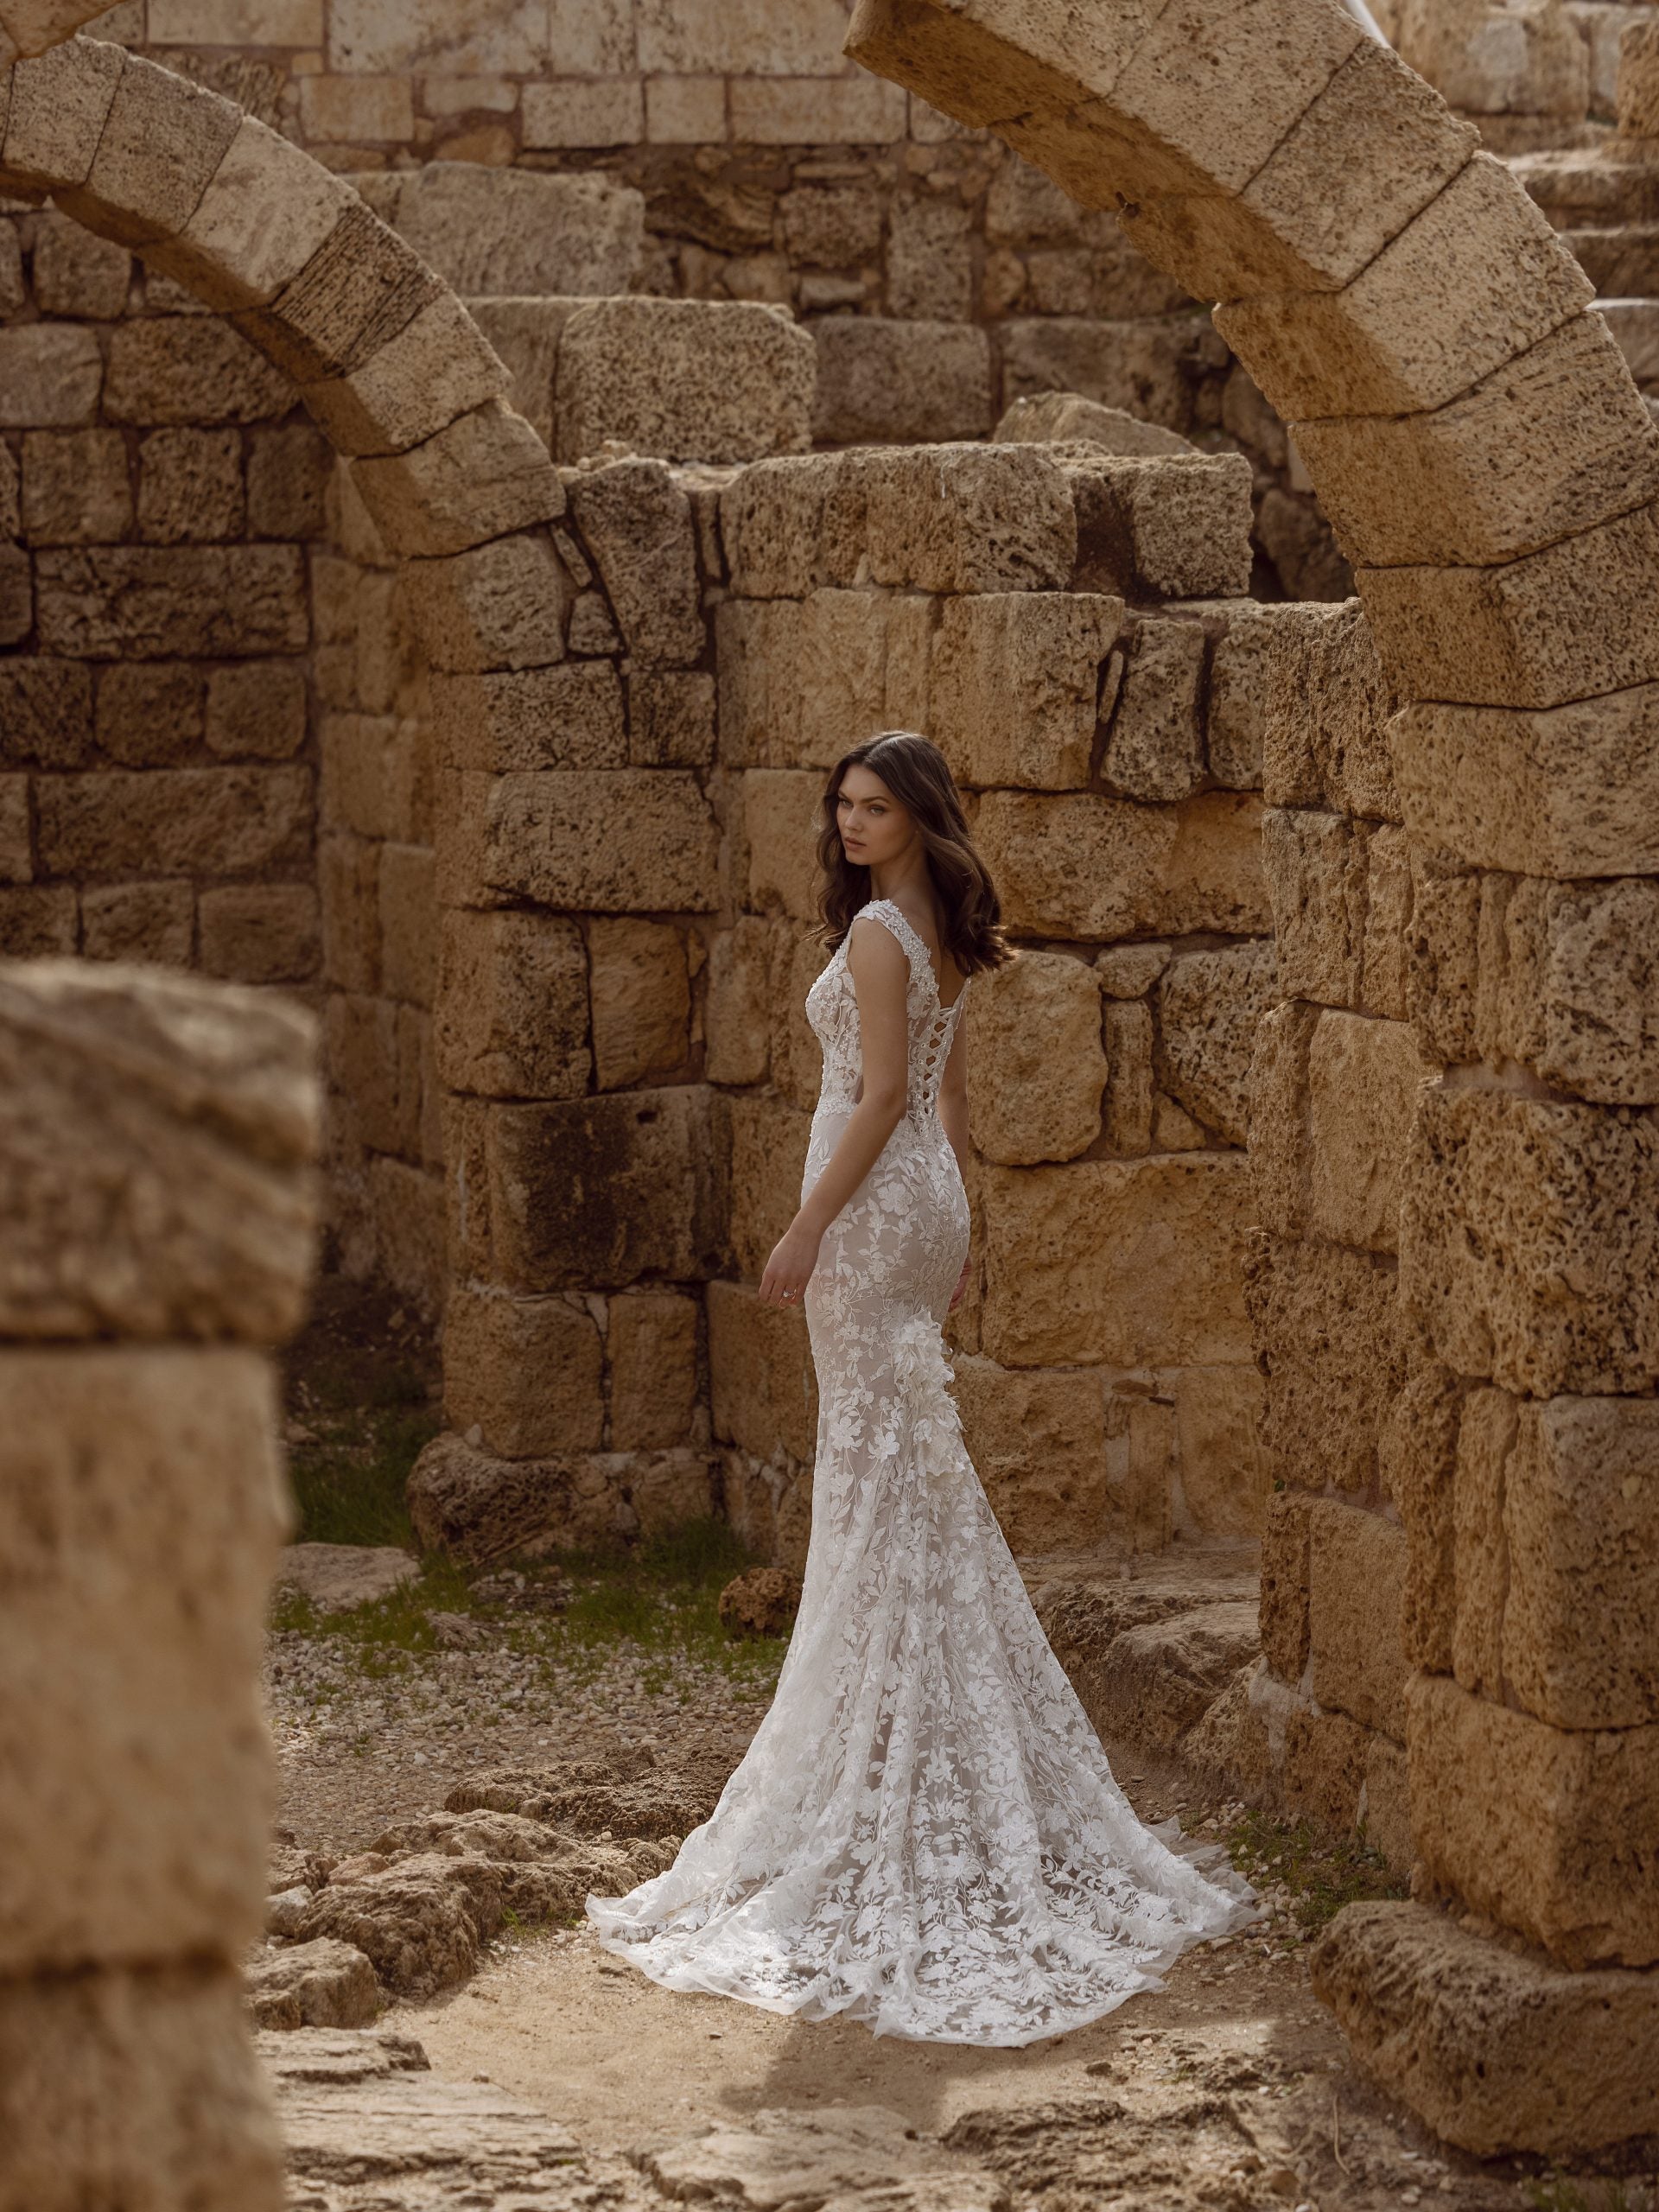 Lace Fit And Flare Wedding Dress With Cap Sleeves by Love by Pnina Tornai - Image 2